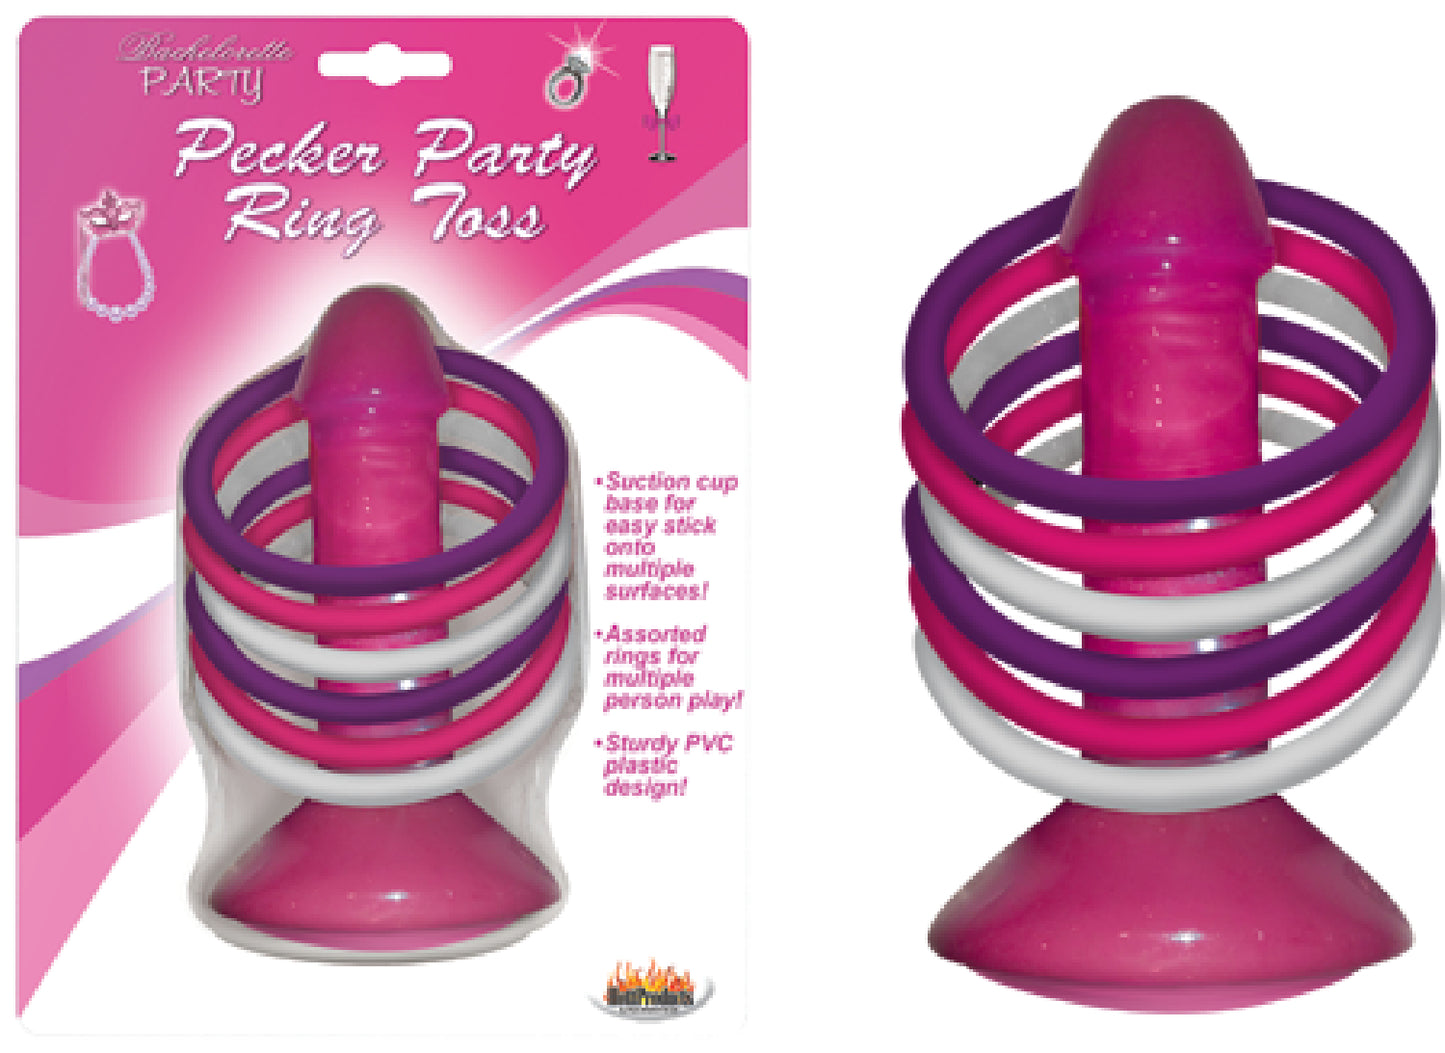 Bachelorette Party Favours Pecker Party Ring Toss - One Stop Adult Shop